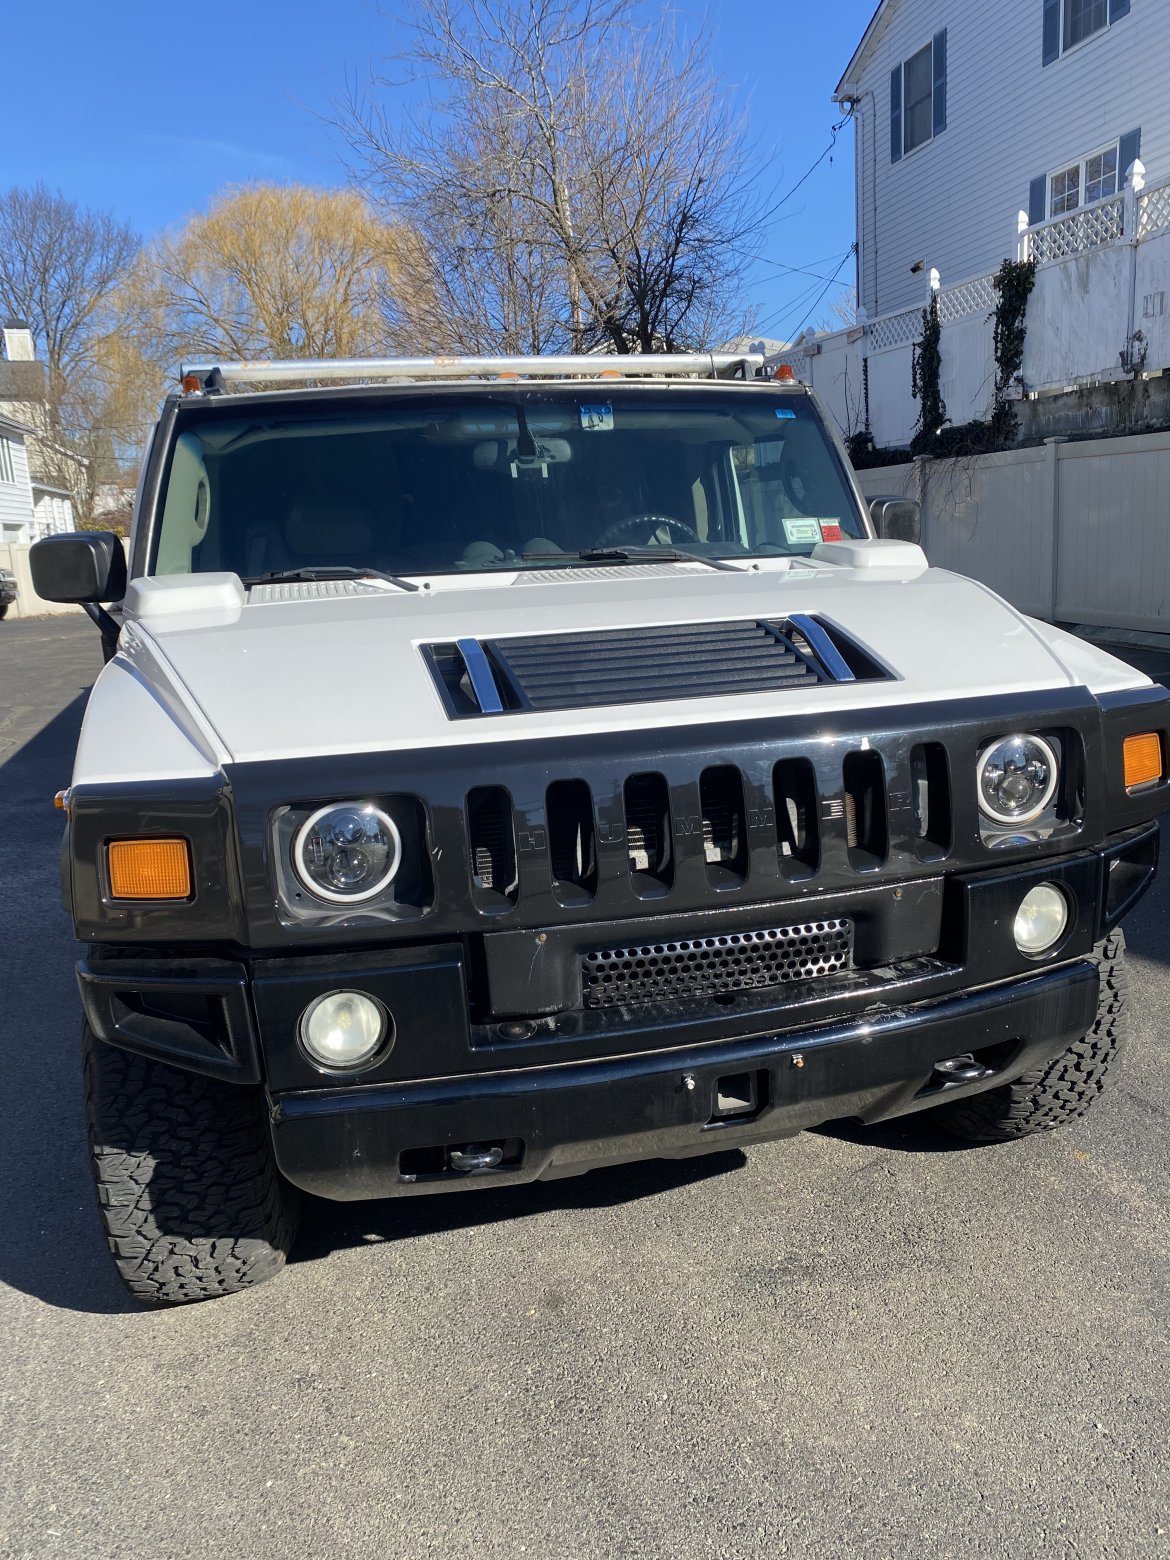 Limousine for sale: 2004 Hummer H2 31&quot; by Ultra